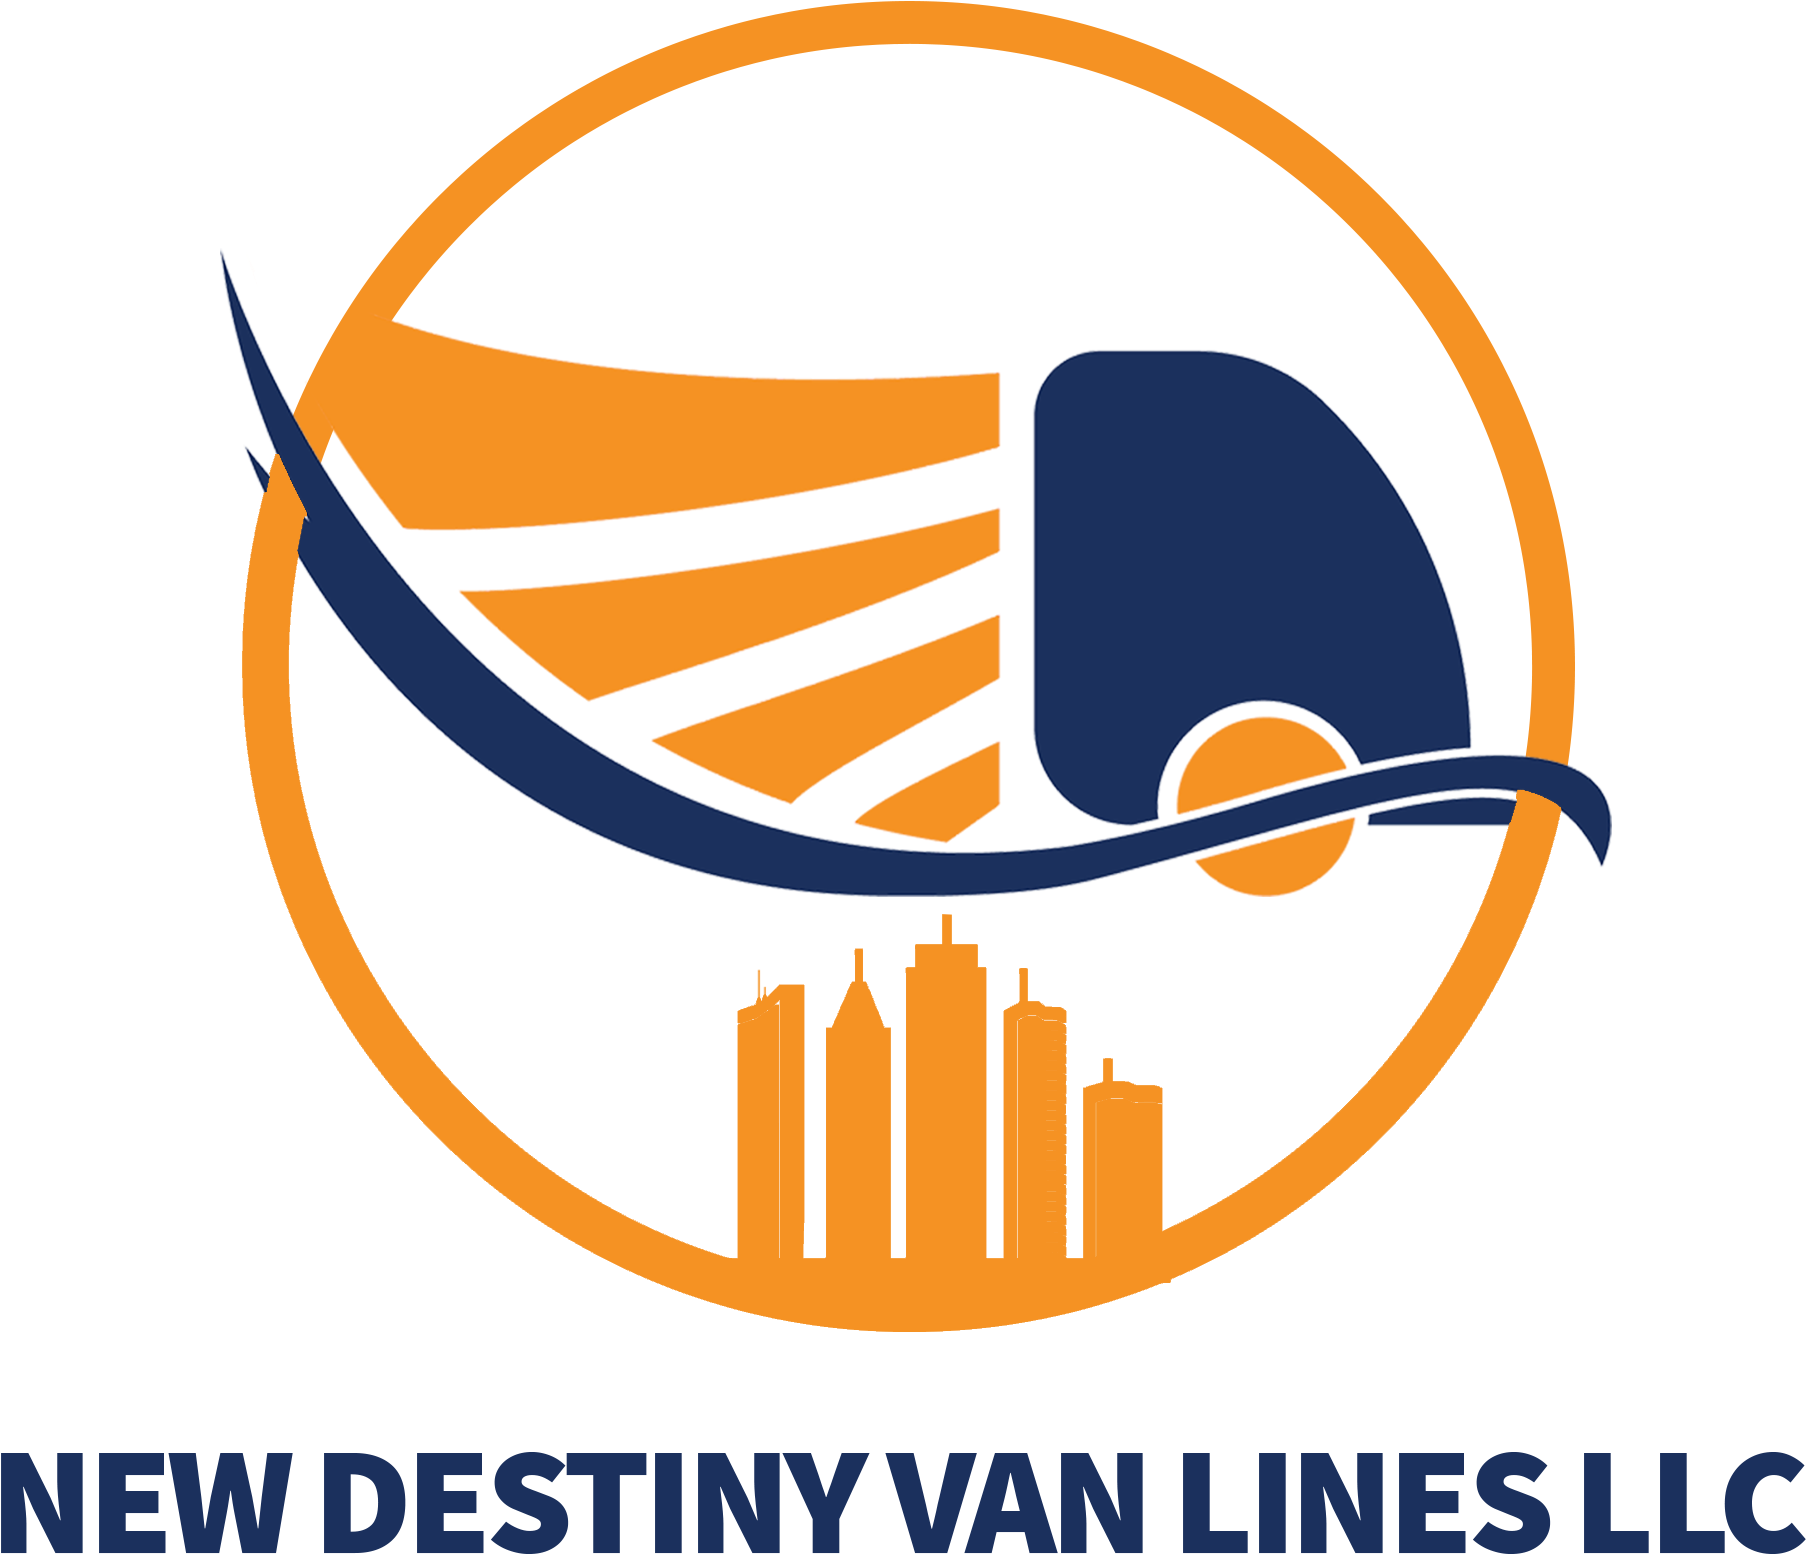 New Destiny Van Lines-easy And Faster Moving - New Destiny Van Lines-easy And Faster Moving (2000x2000)